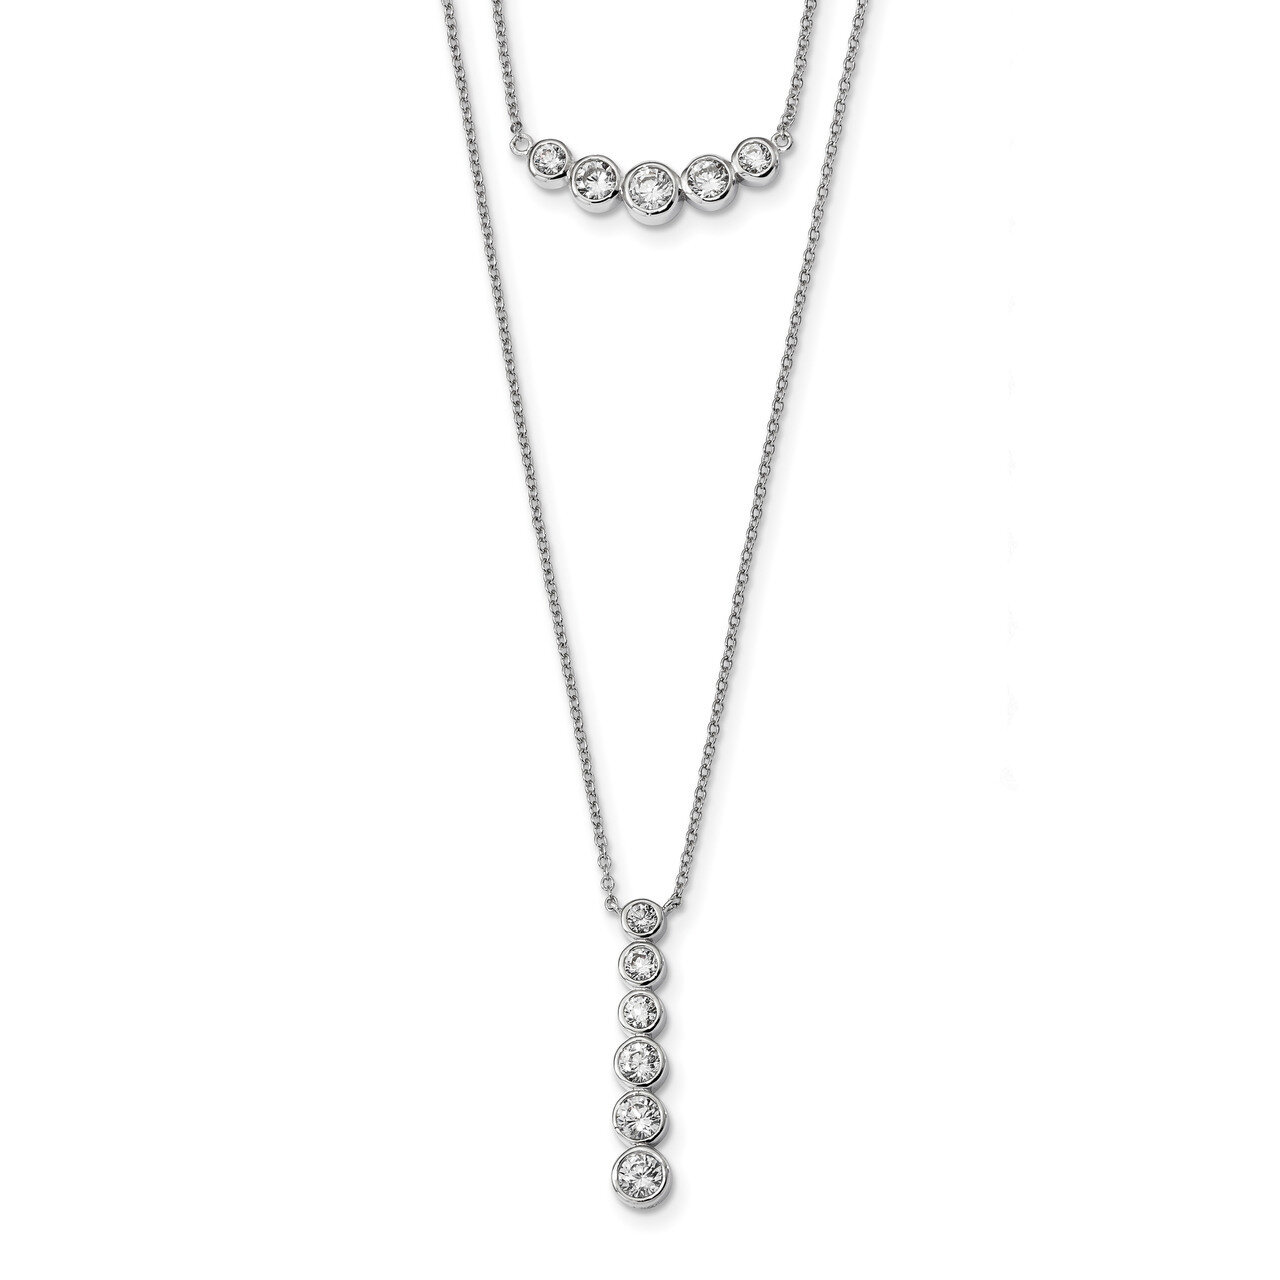 Double Strand CZ Diamond Necklace 16 Inch Sterling Silver Rhodium-plated QG4305-16